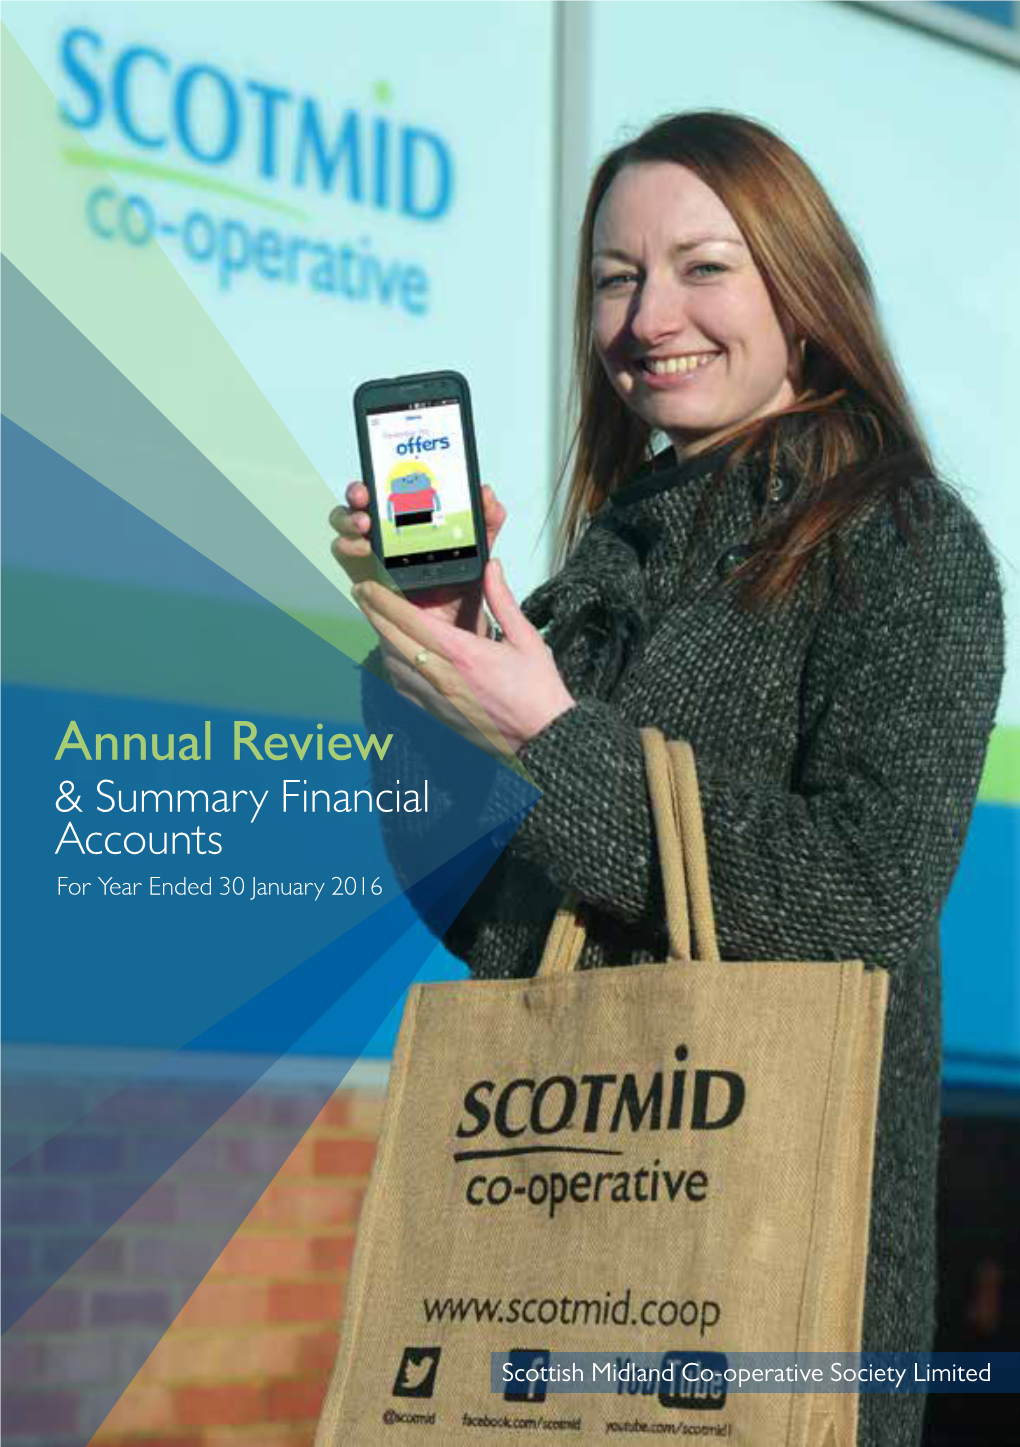 Annual Review & Summary Financial Accounts for Year Ended 31 January 2015